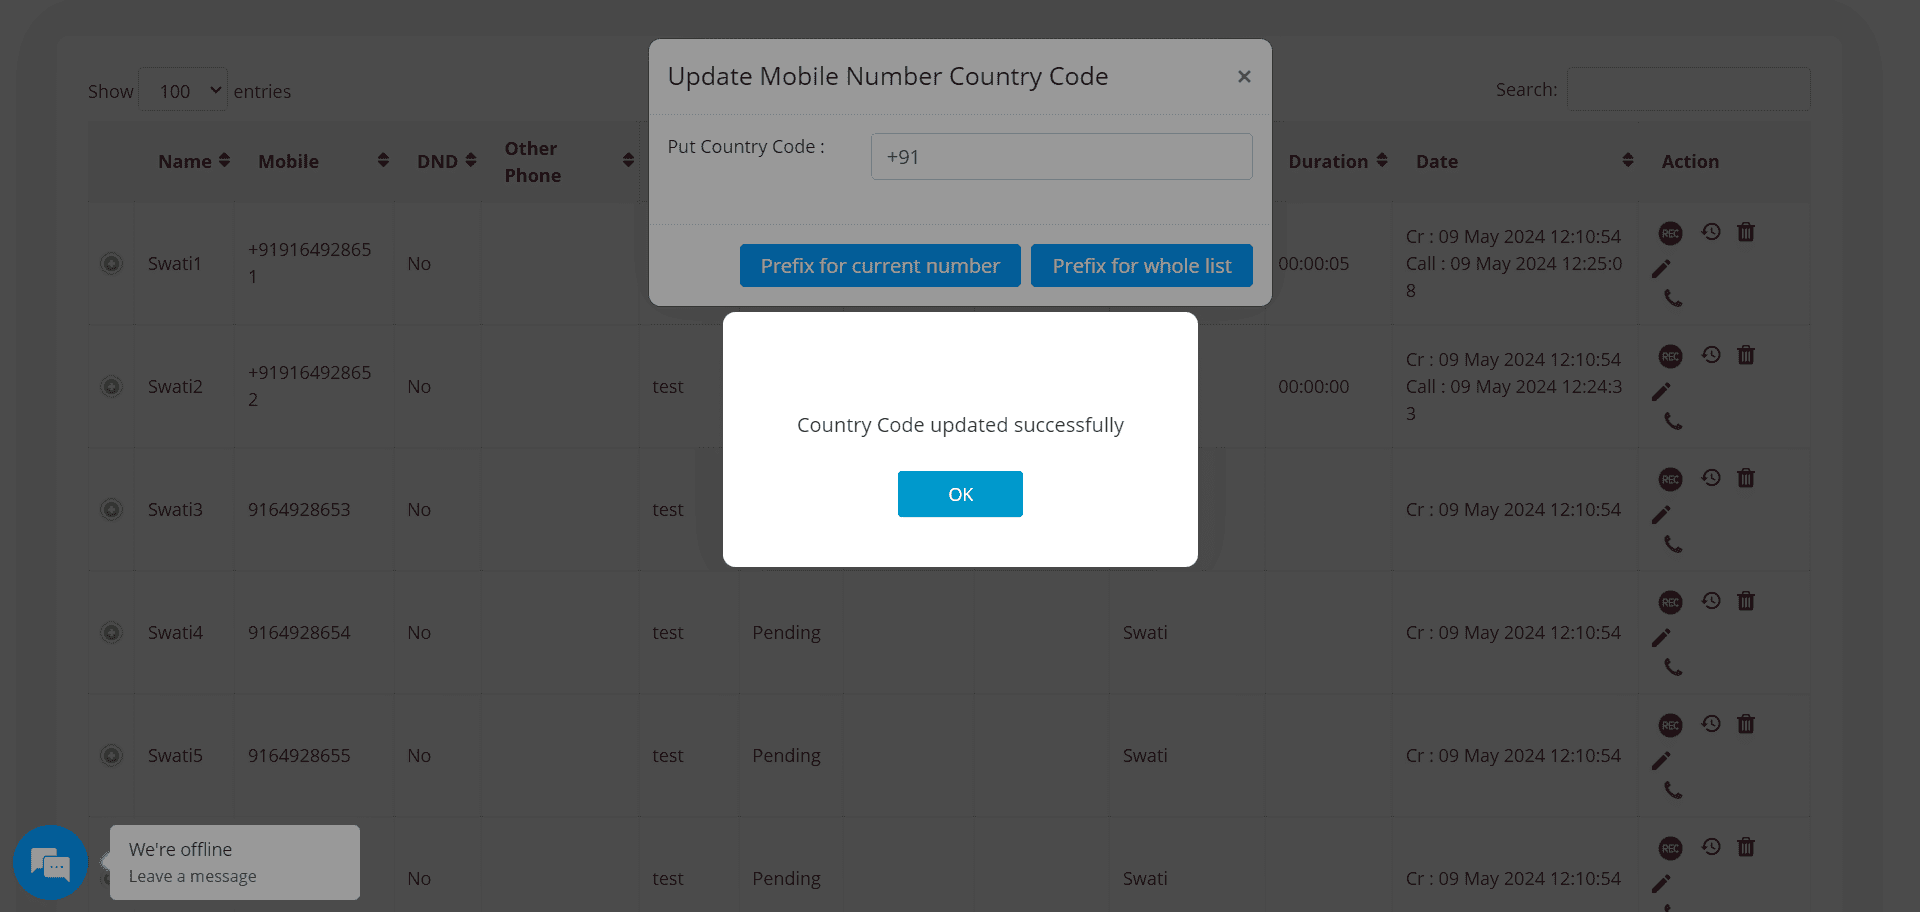 You can set a country code for the whole list